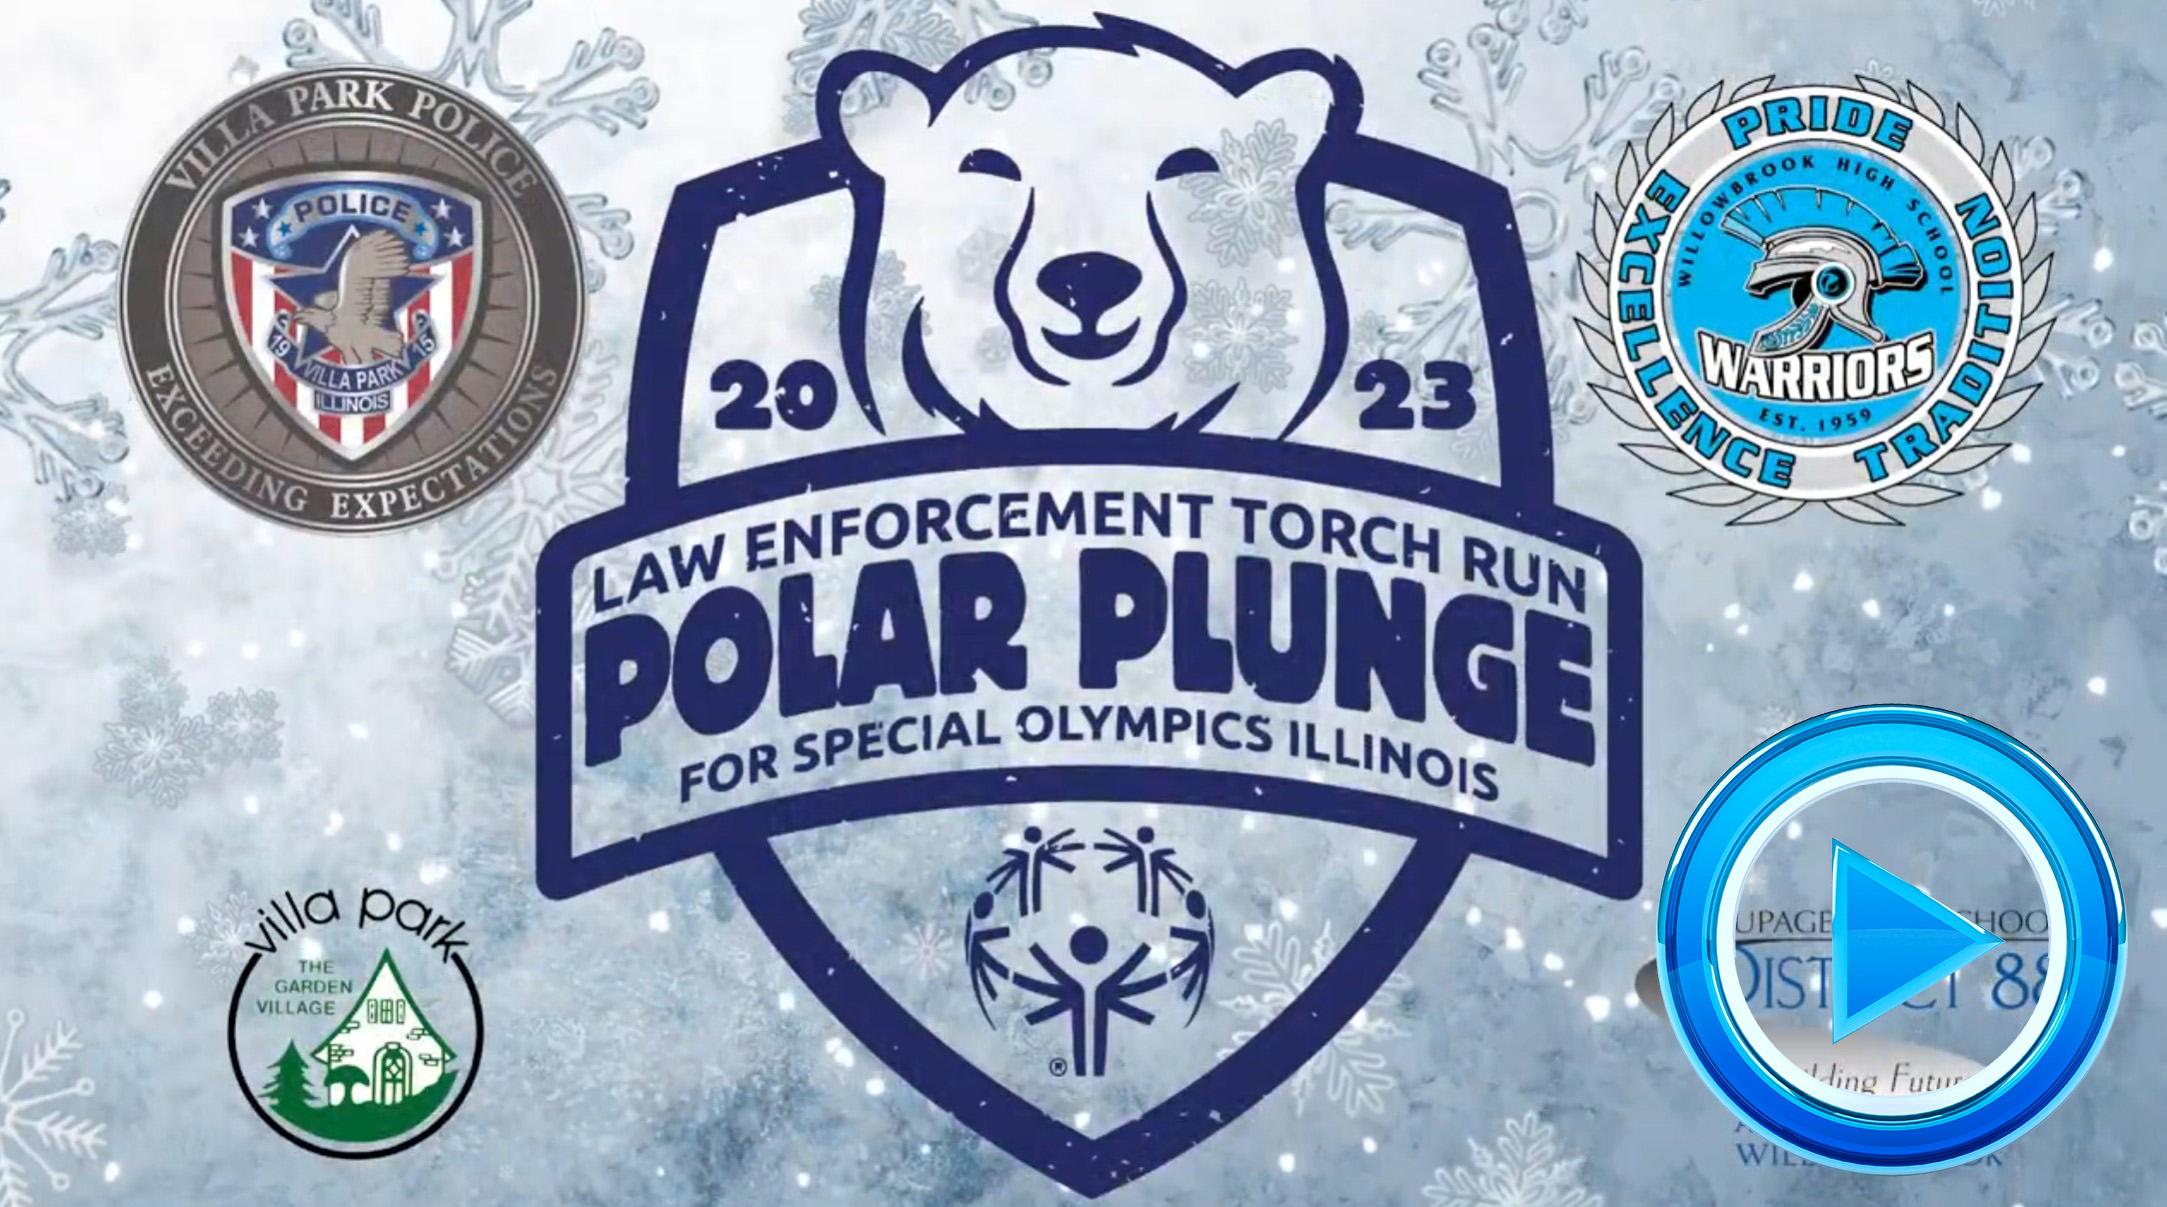 Willowbrook/District 88 and Villa Park Police Department participate in 2023 Law Enforcement Torch Run Polar Plunge to support Special Olympics athletes